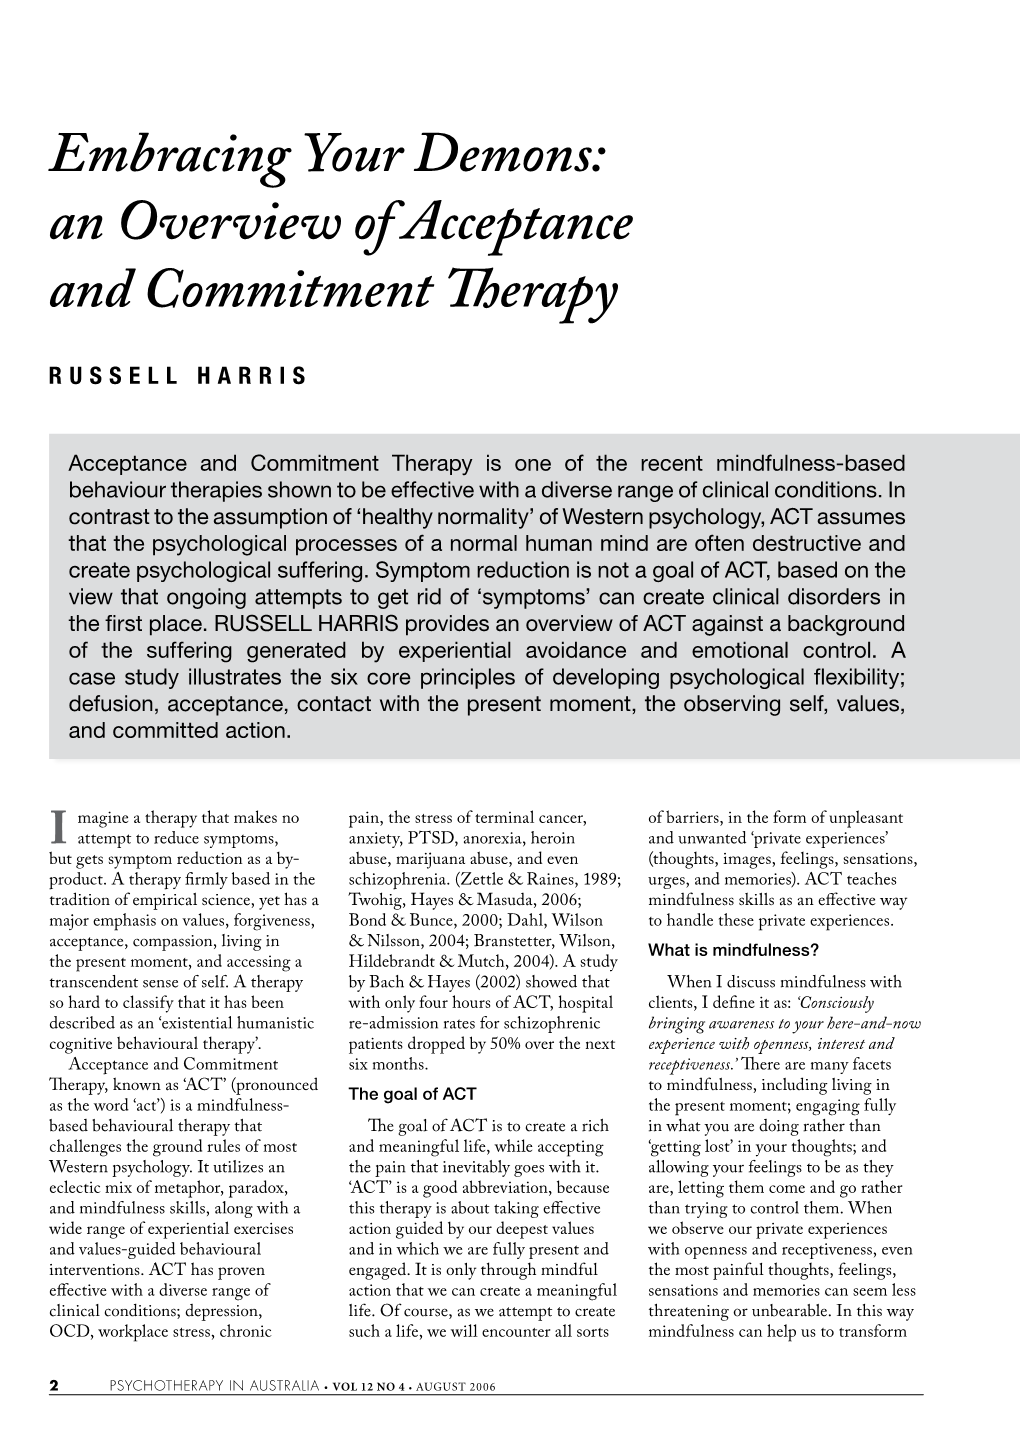 An Overview of Acceptance and Commitment Therapy RUSSELL HARRIS